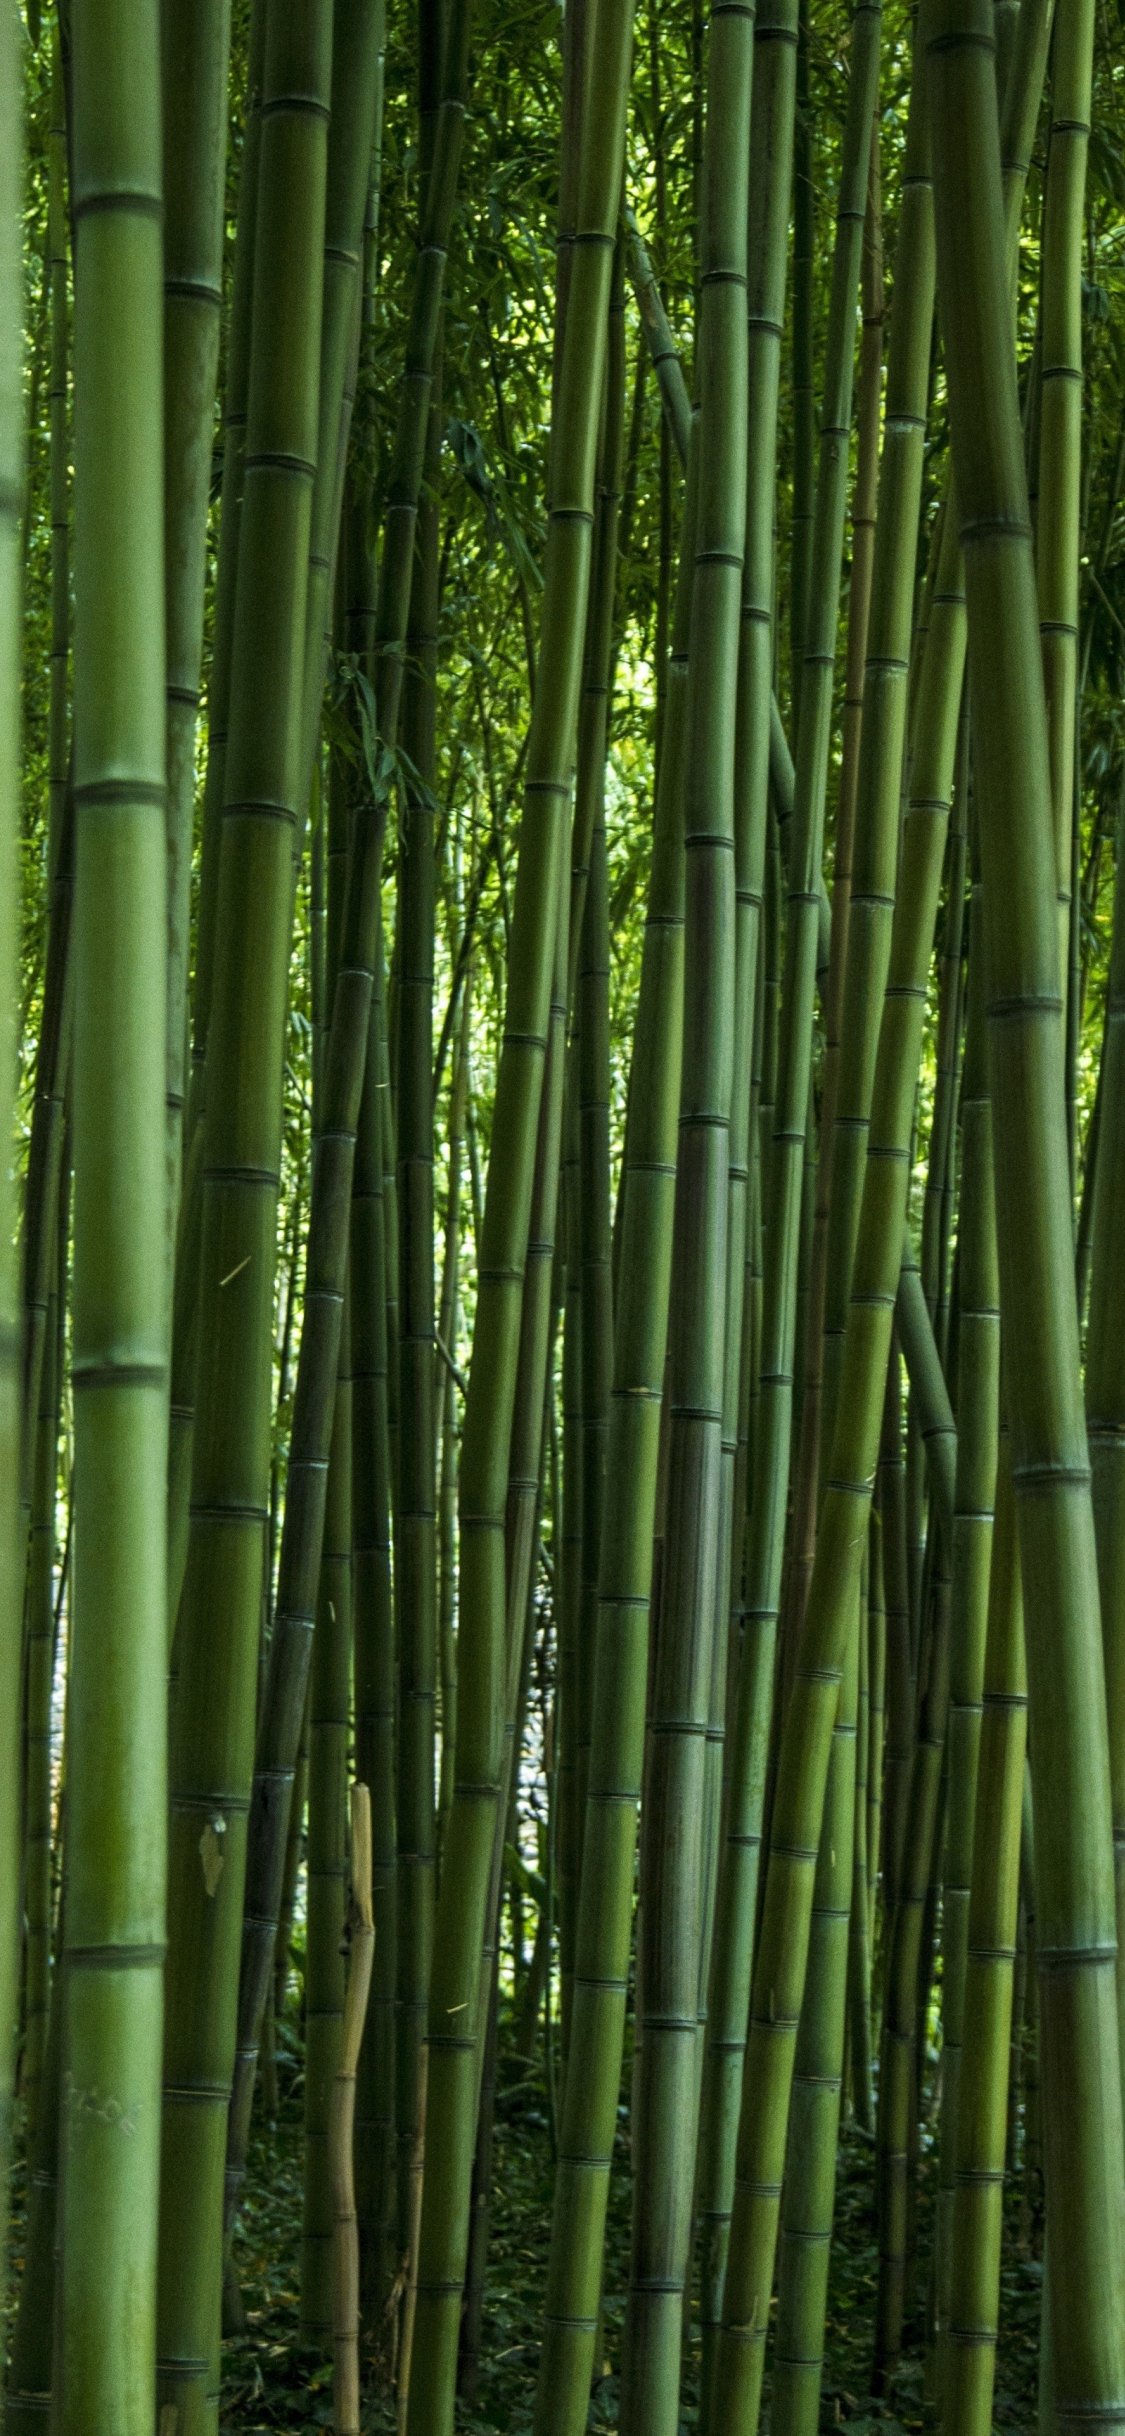 Download green, forest, bamboo, trees 1125x2436 wallpaper, iphone x, 1125x2436 HD image, background, 5712